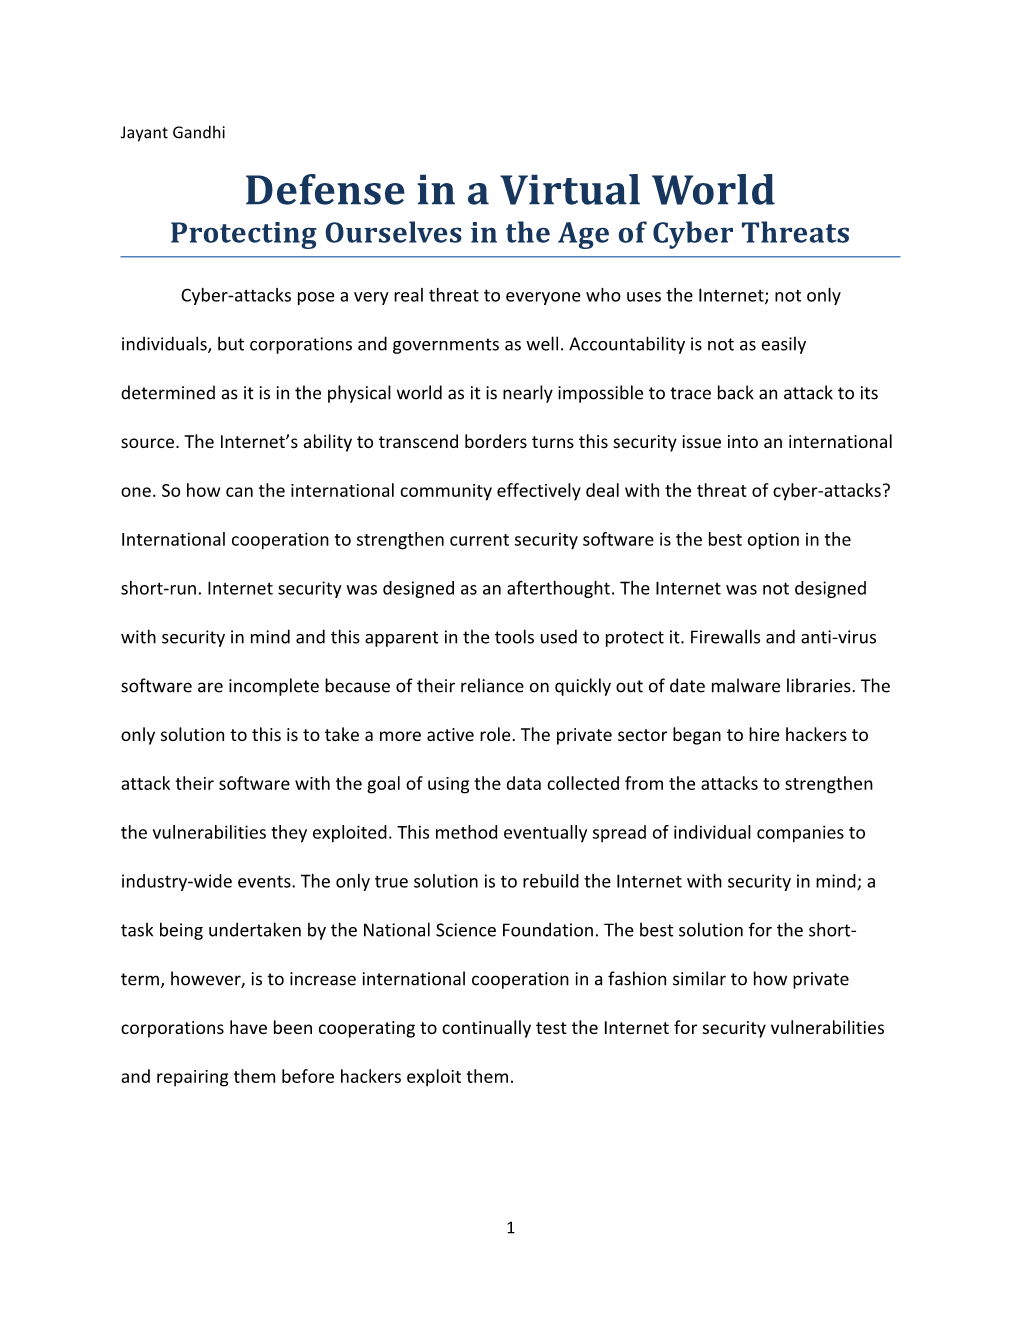 Security in the Virtual World